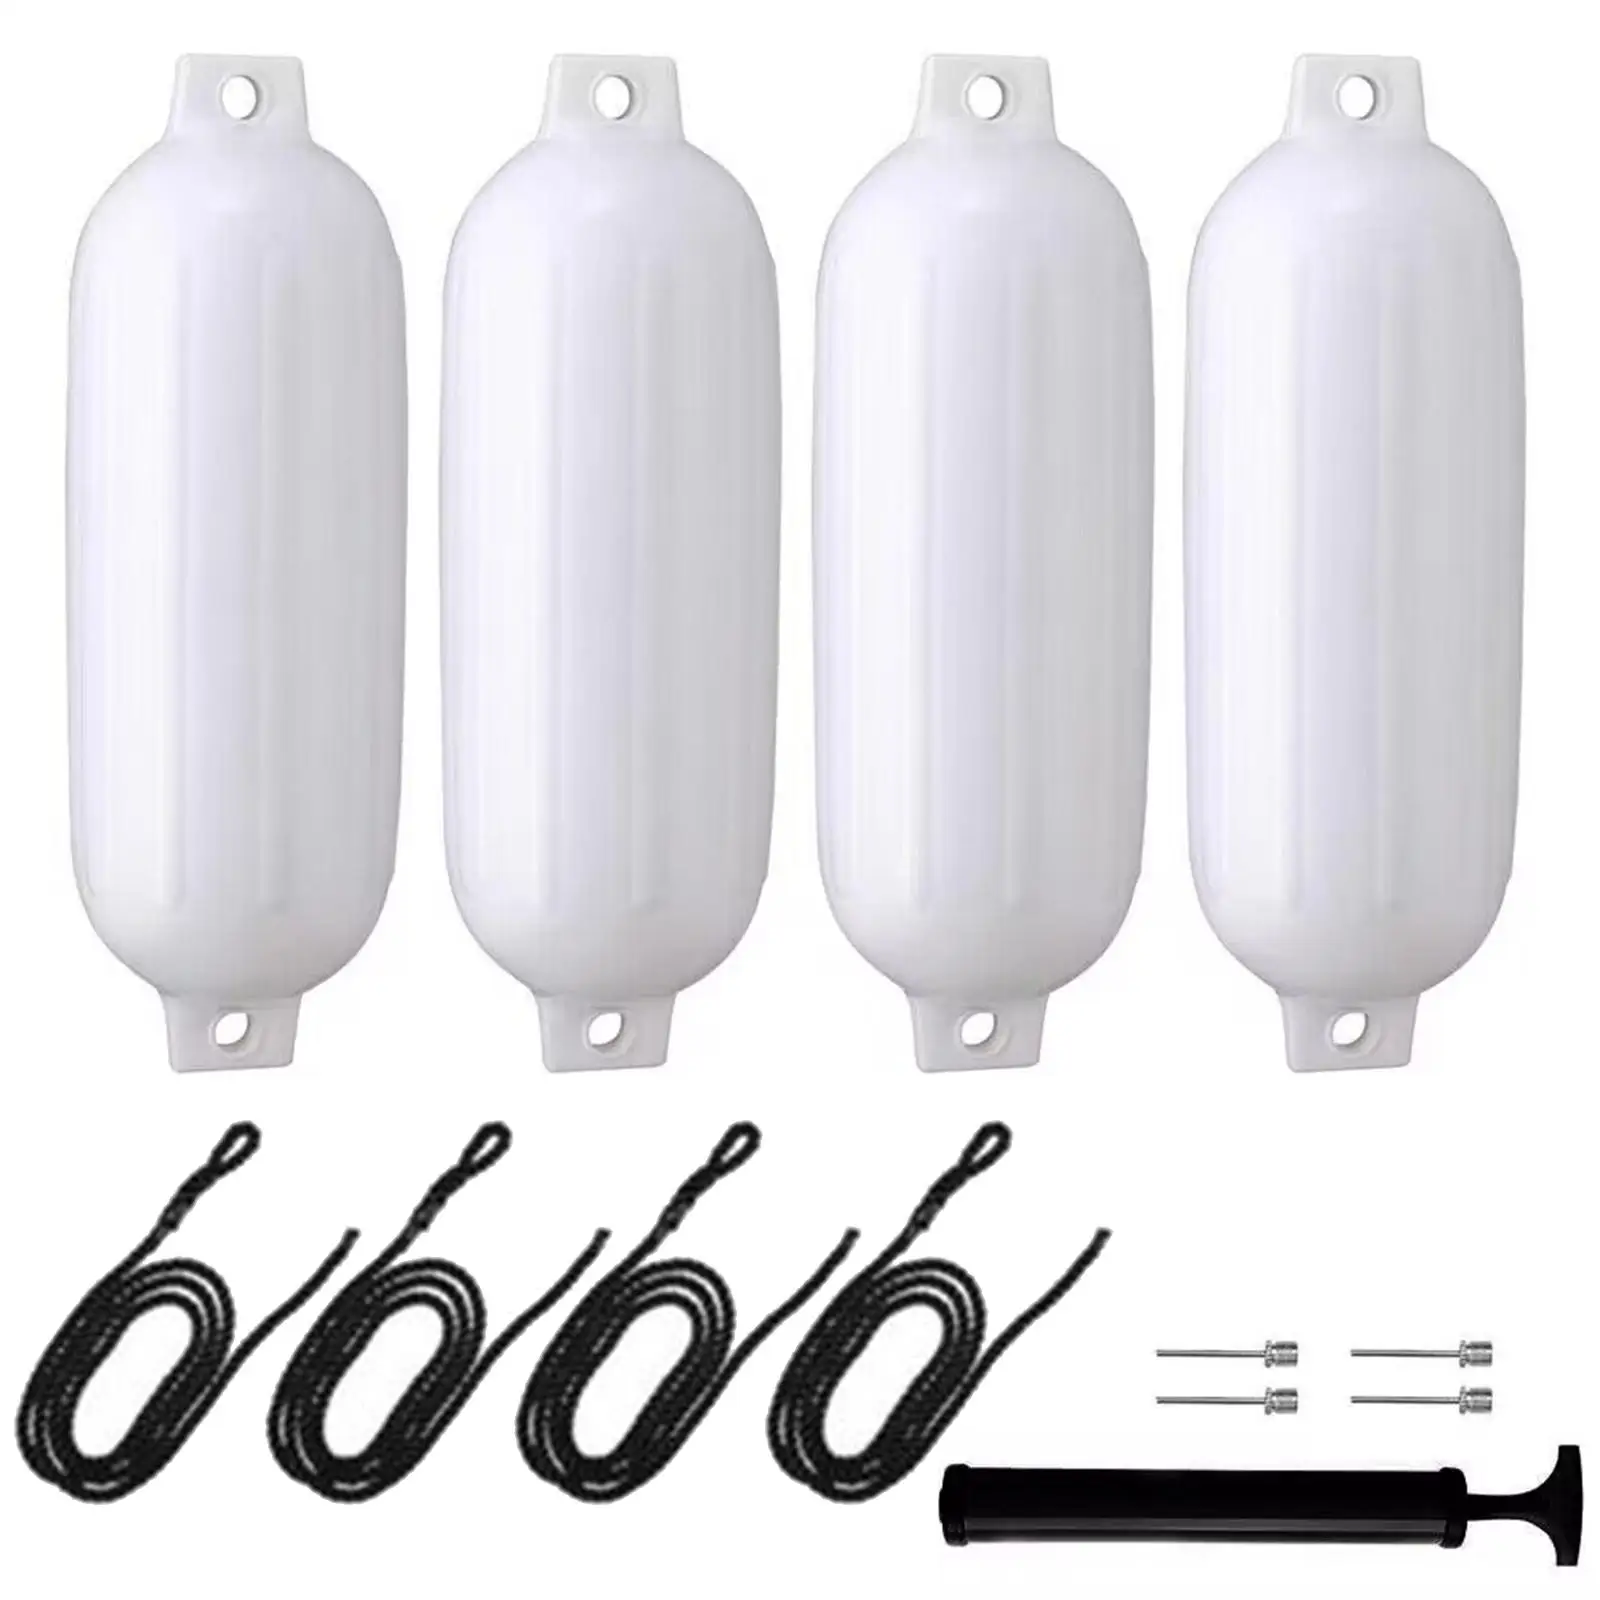 4x Boat Fender Inflatable Marine Boat Bumper for Docking Fishing Boats